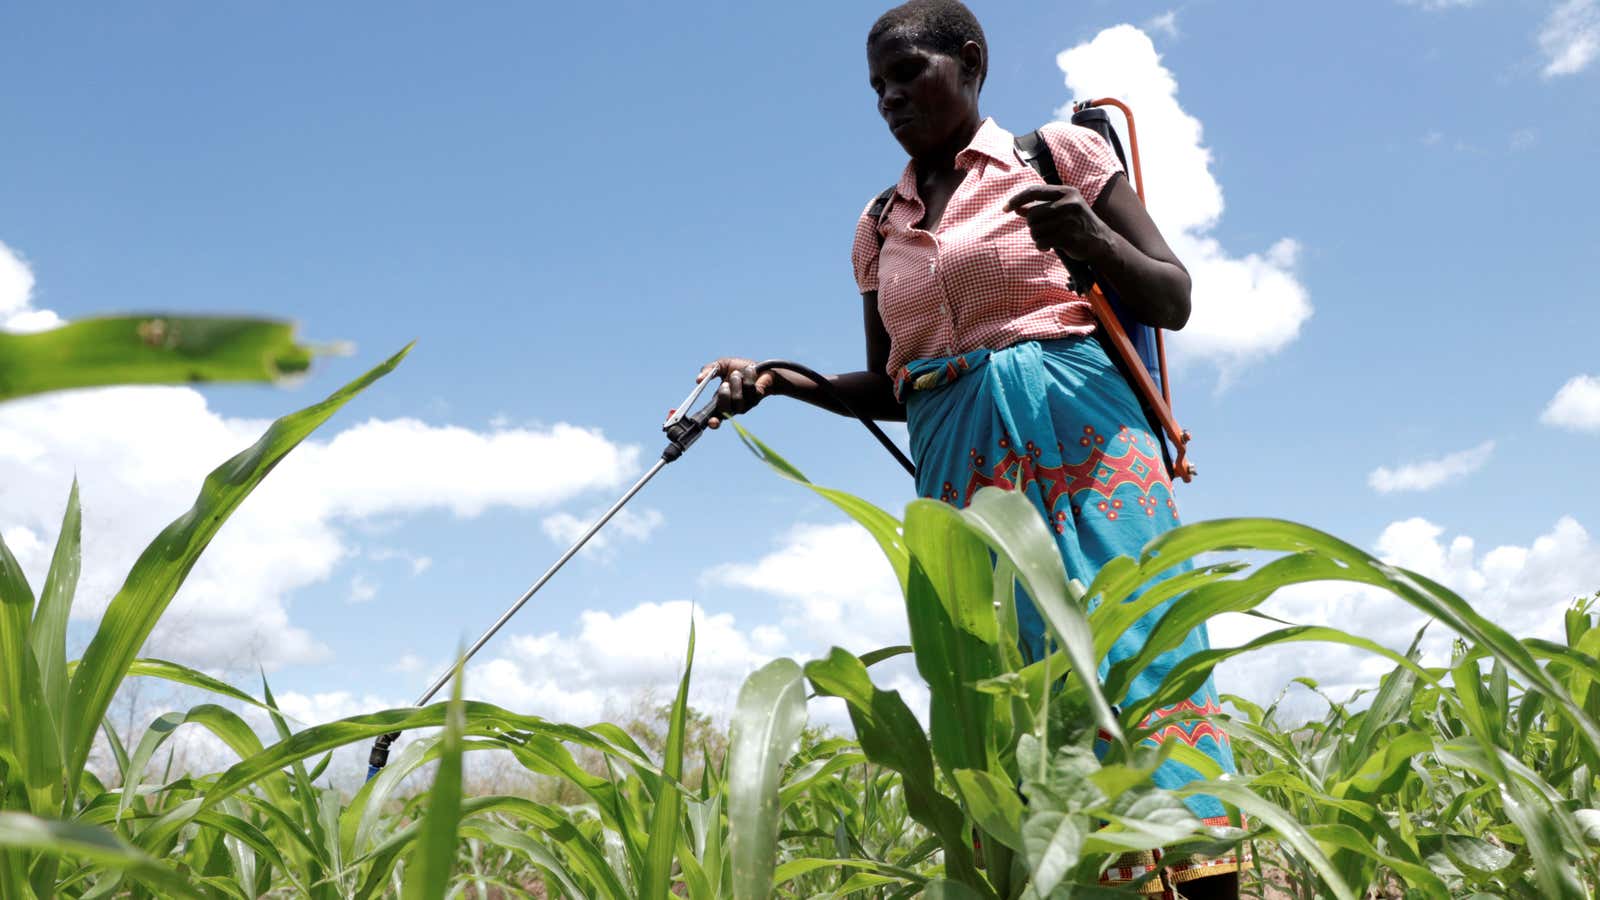 A local farmer sprays a pesticide on her maize field in Chikwawa District, Malawi